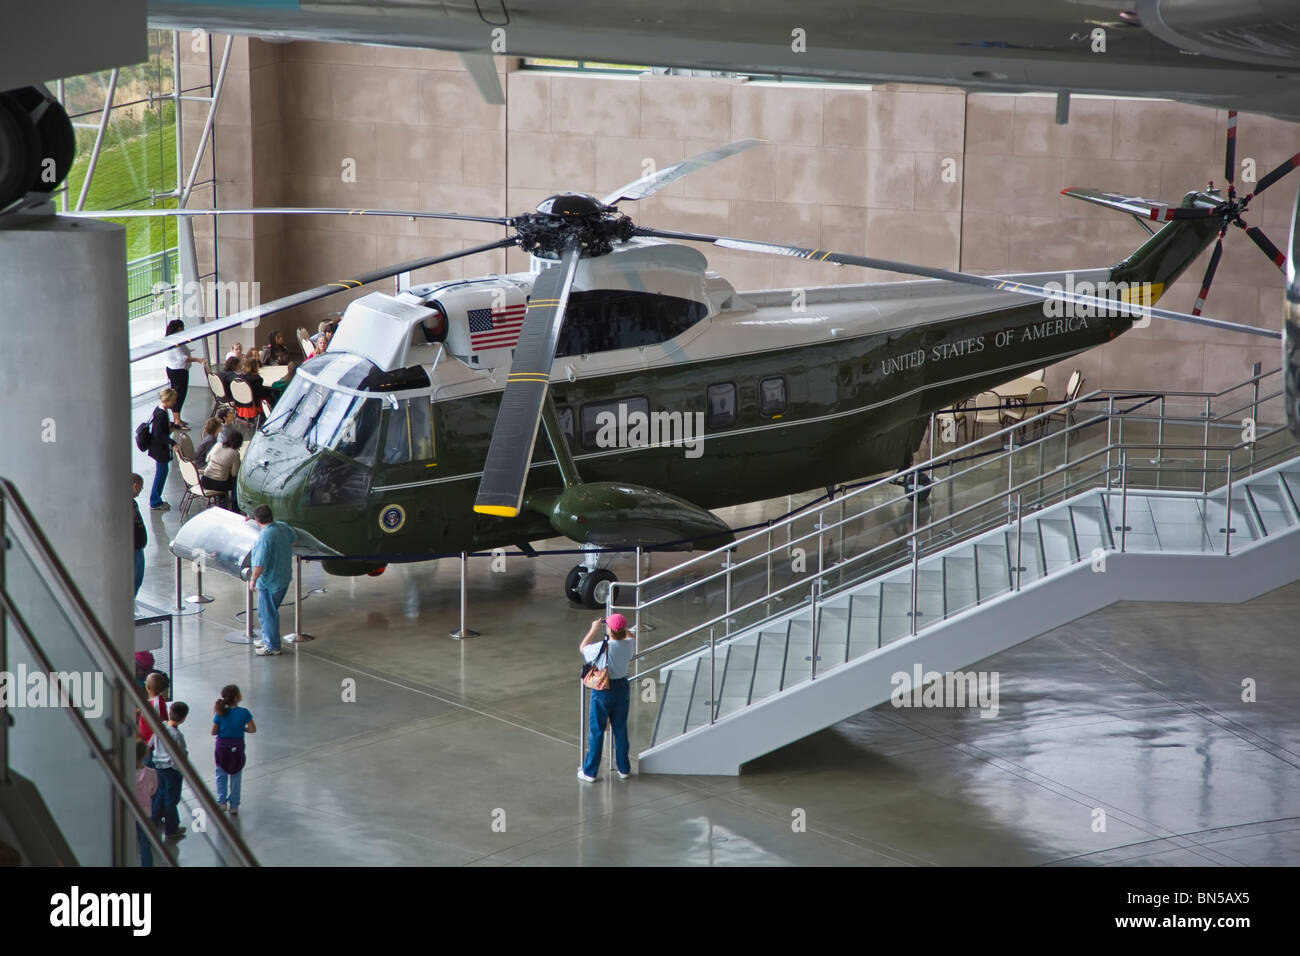 Marine One exhibit at the Ronald Reagan Presidential Library and Museum in Simi Valley, California, United States Stock Photo